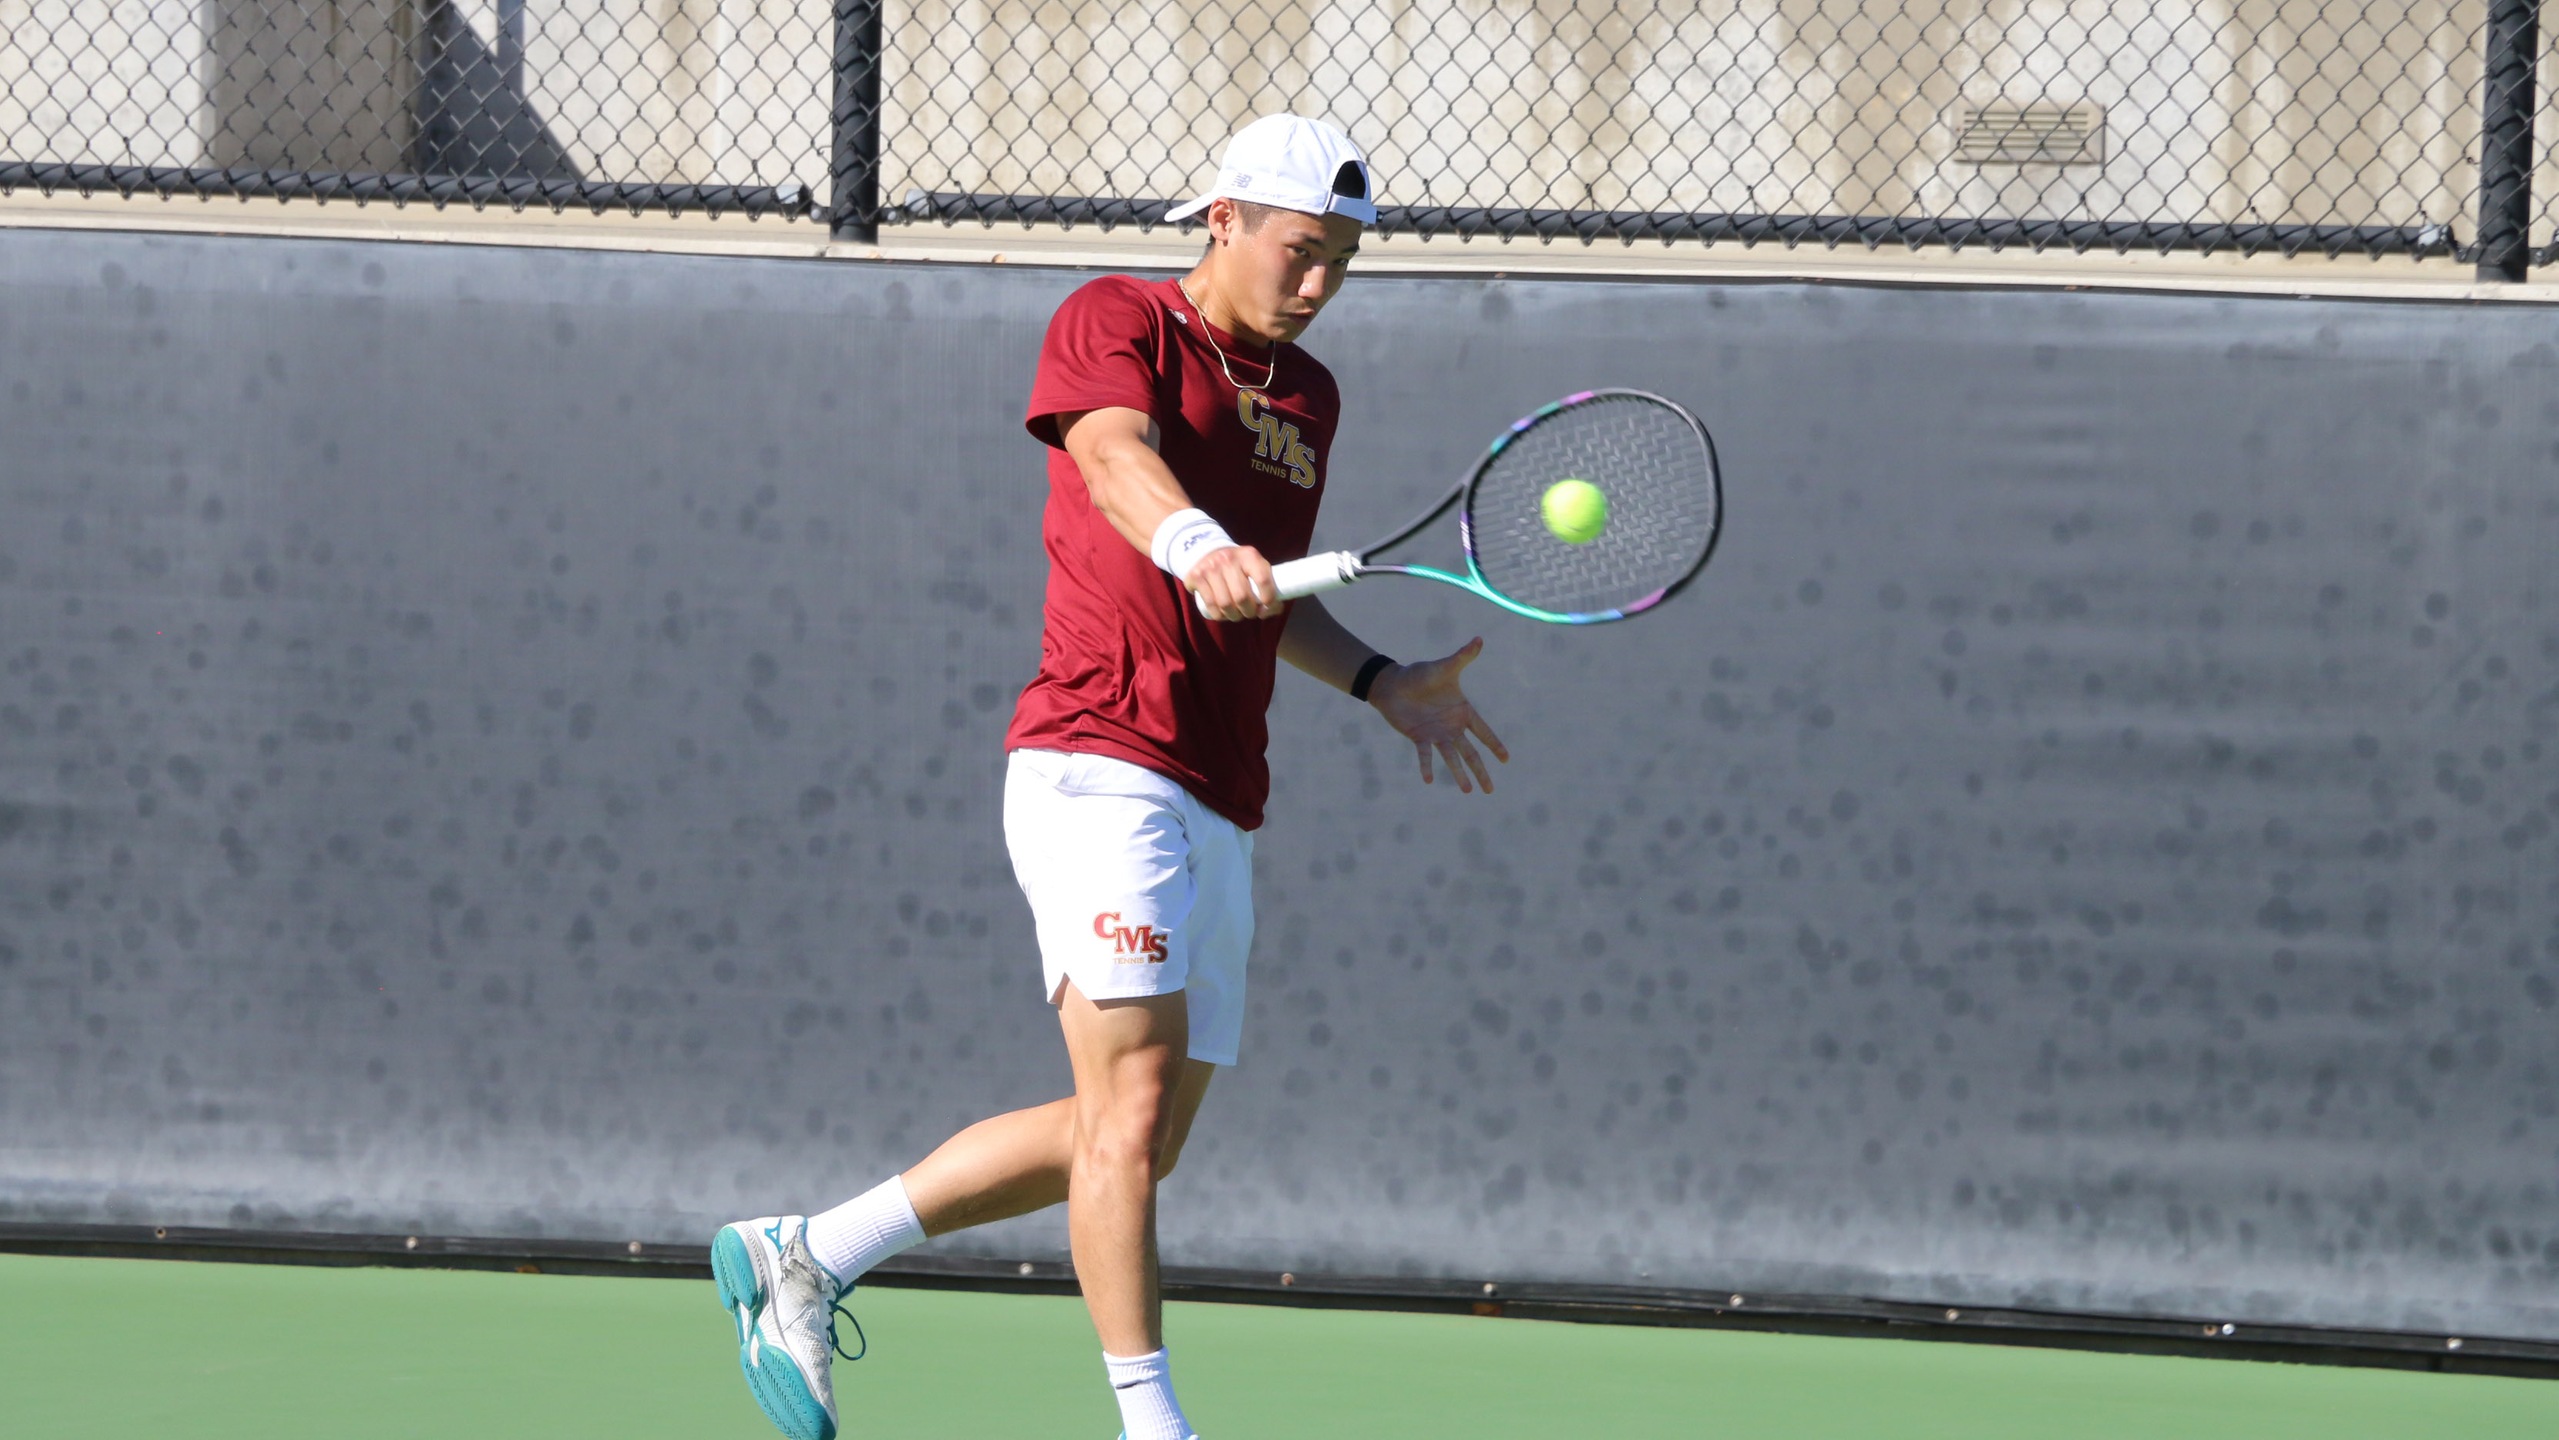 Chris Li won twice in singles and once in doubles in the Stags' victories over Point Loma and UC Santa Cruz on Friday.